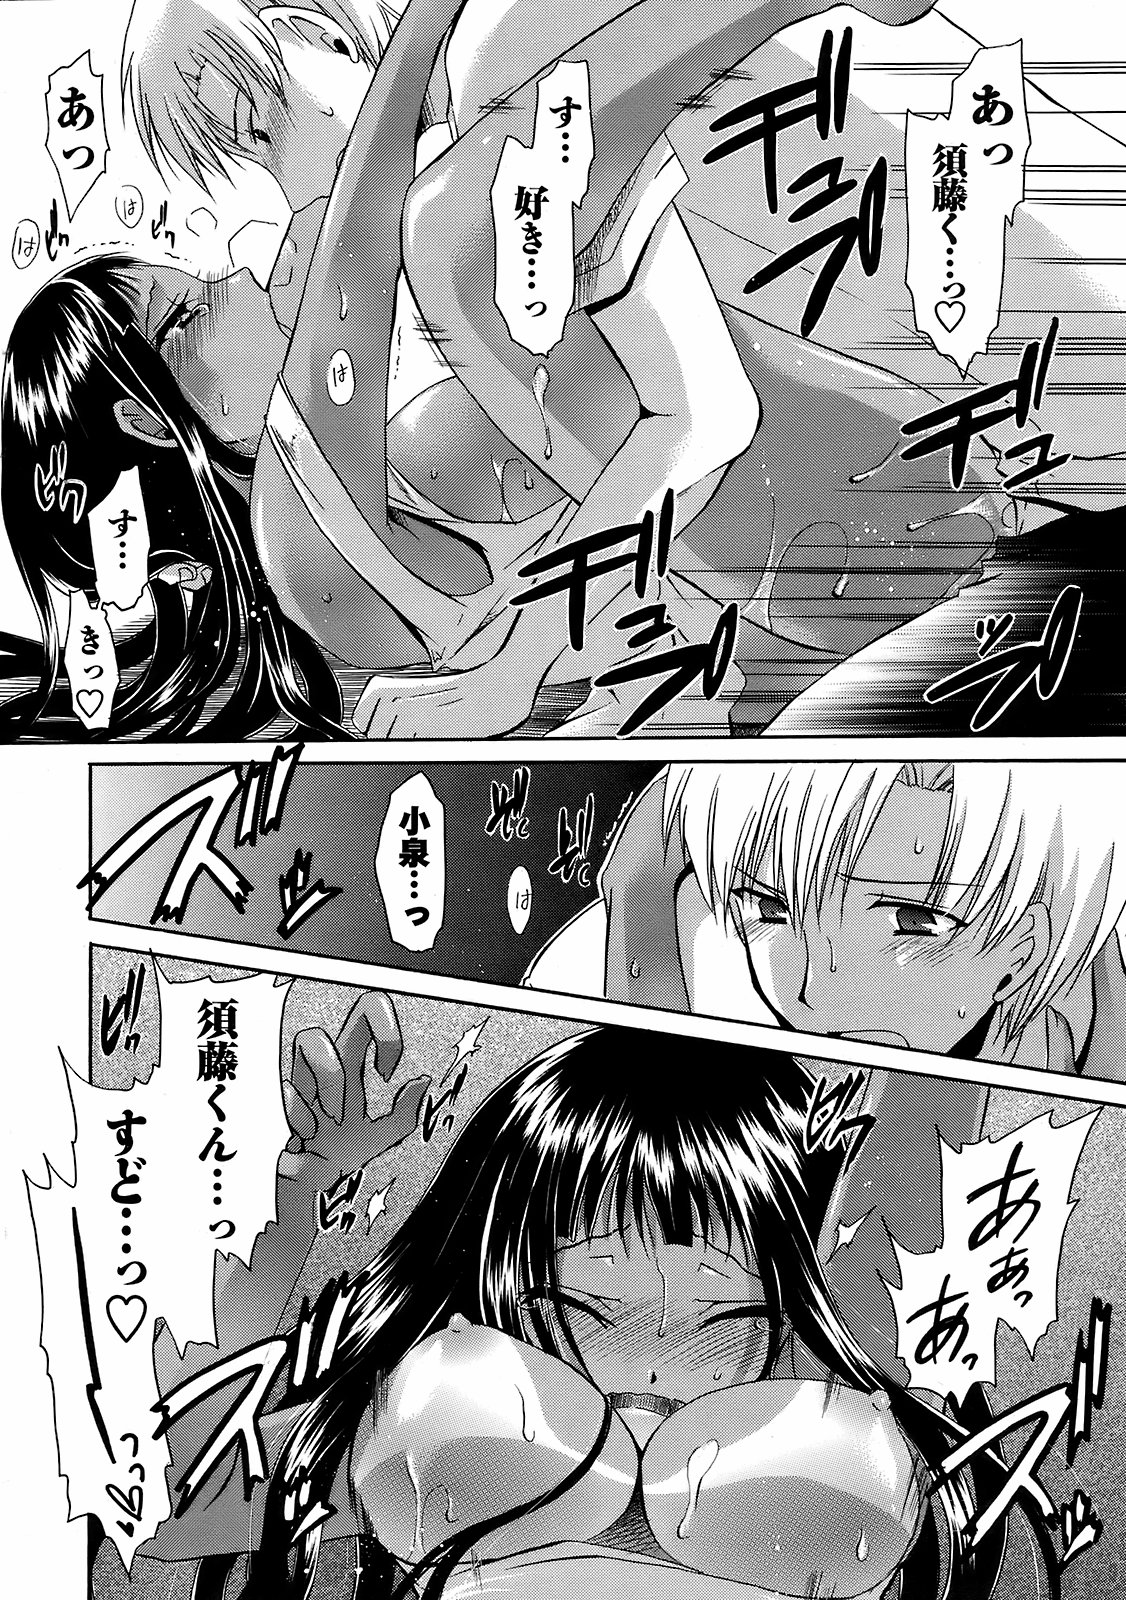 Men's Young Special Ikazuchi Vol 08 page 27 full